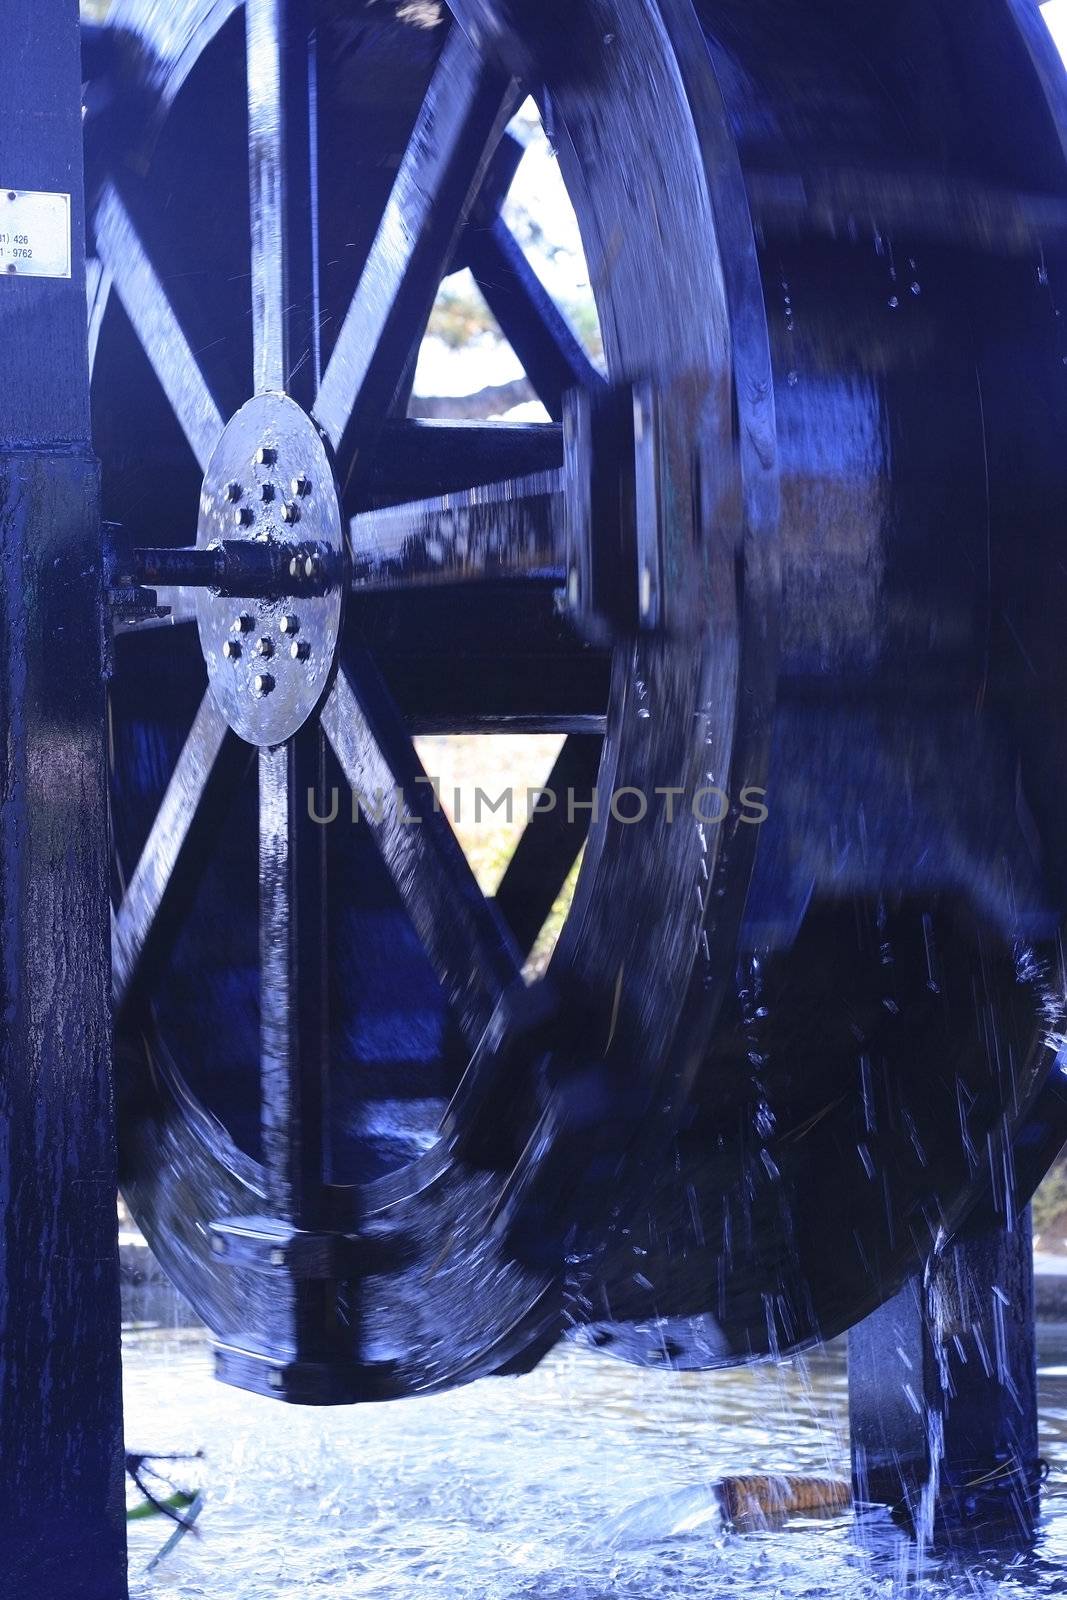 Antique Waterwheels working - with water in motion blur